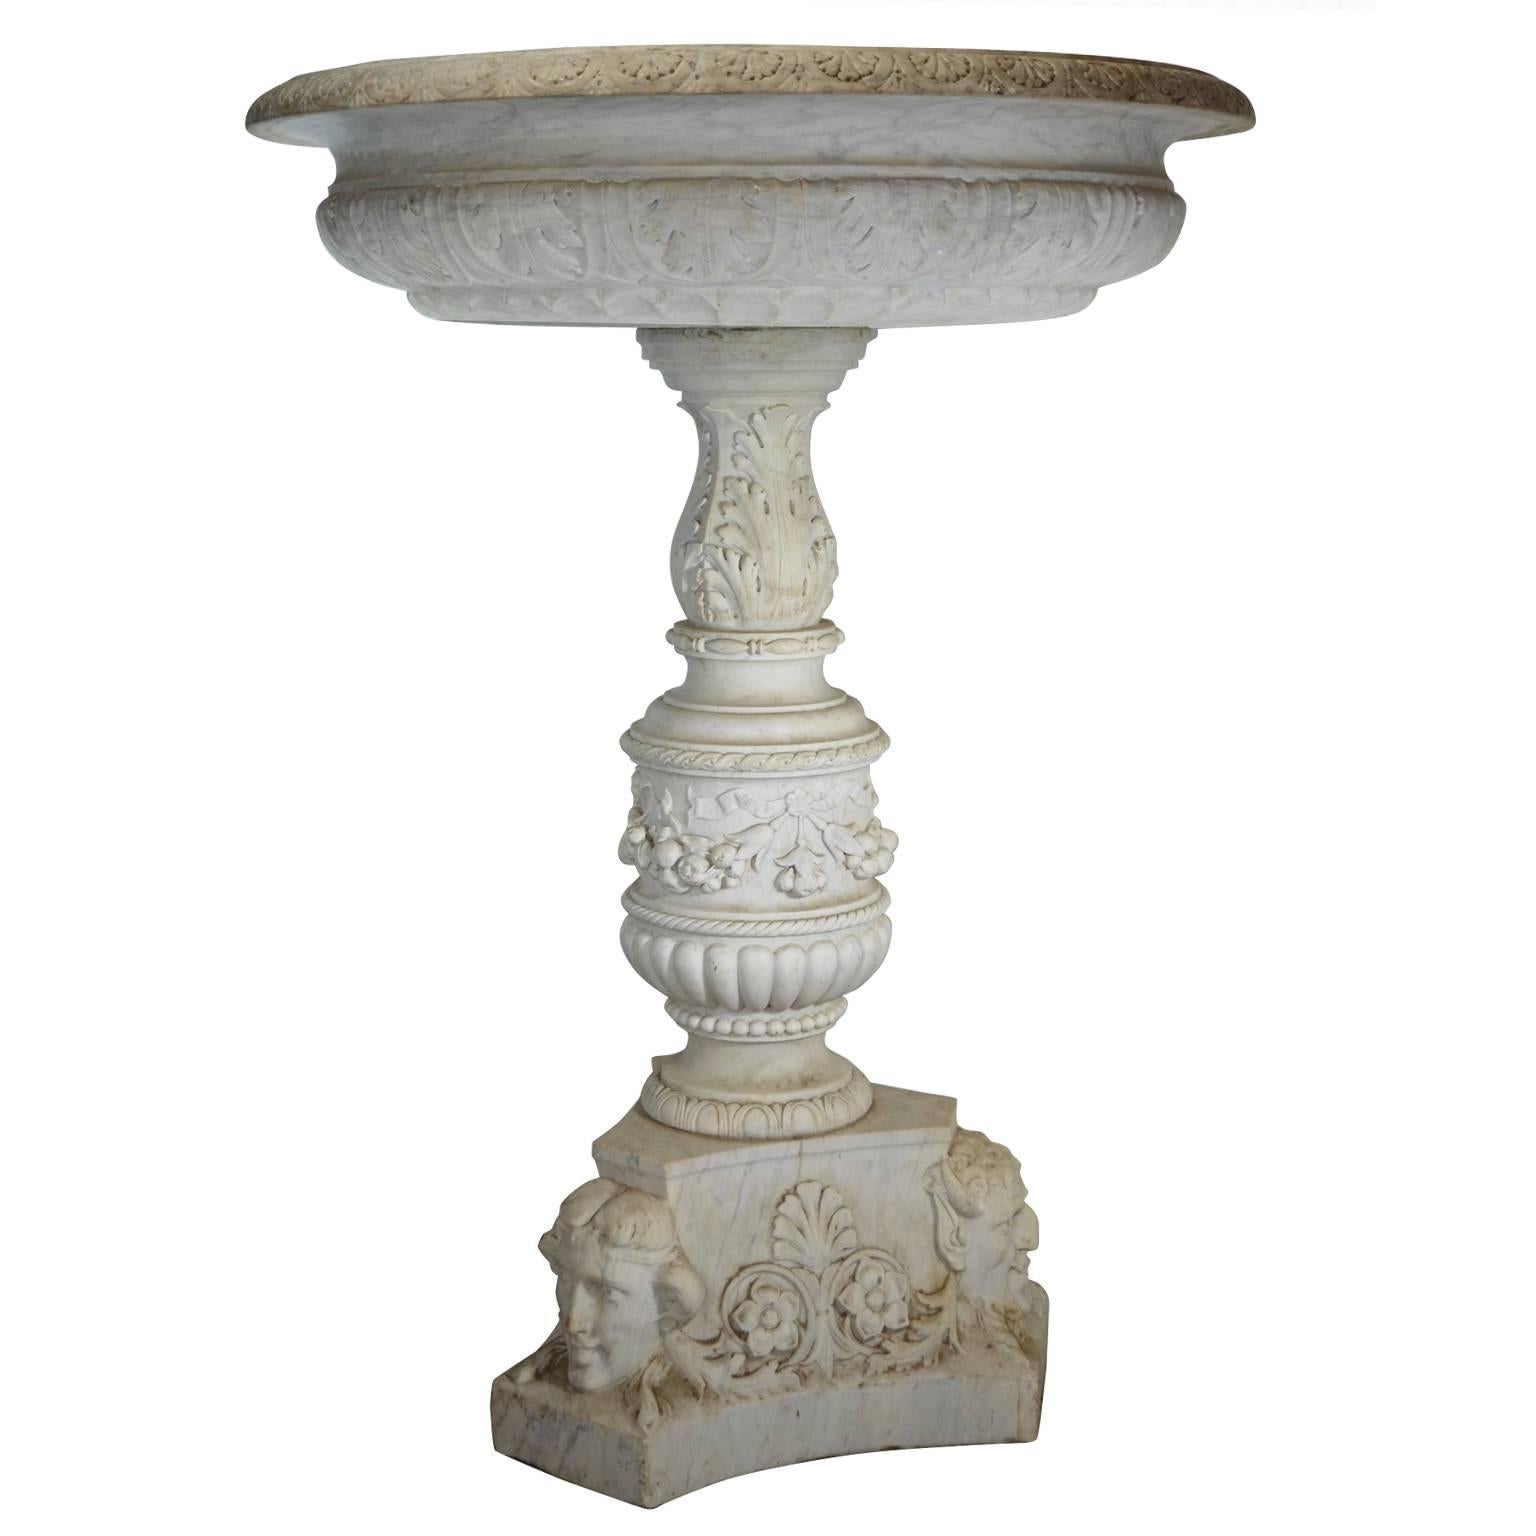 Italian Carved White Carrare Marble Fountain Late 18th Century For Sale